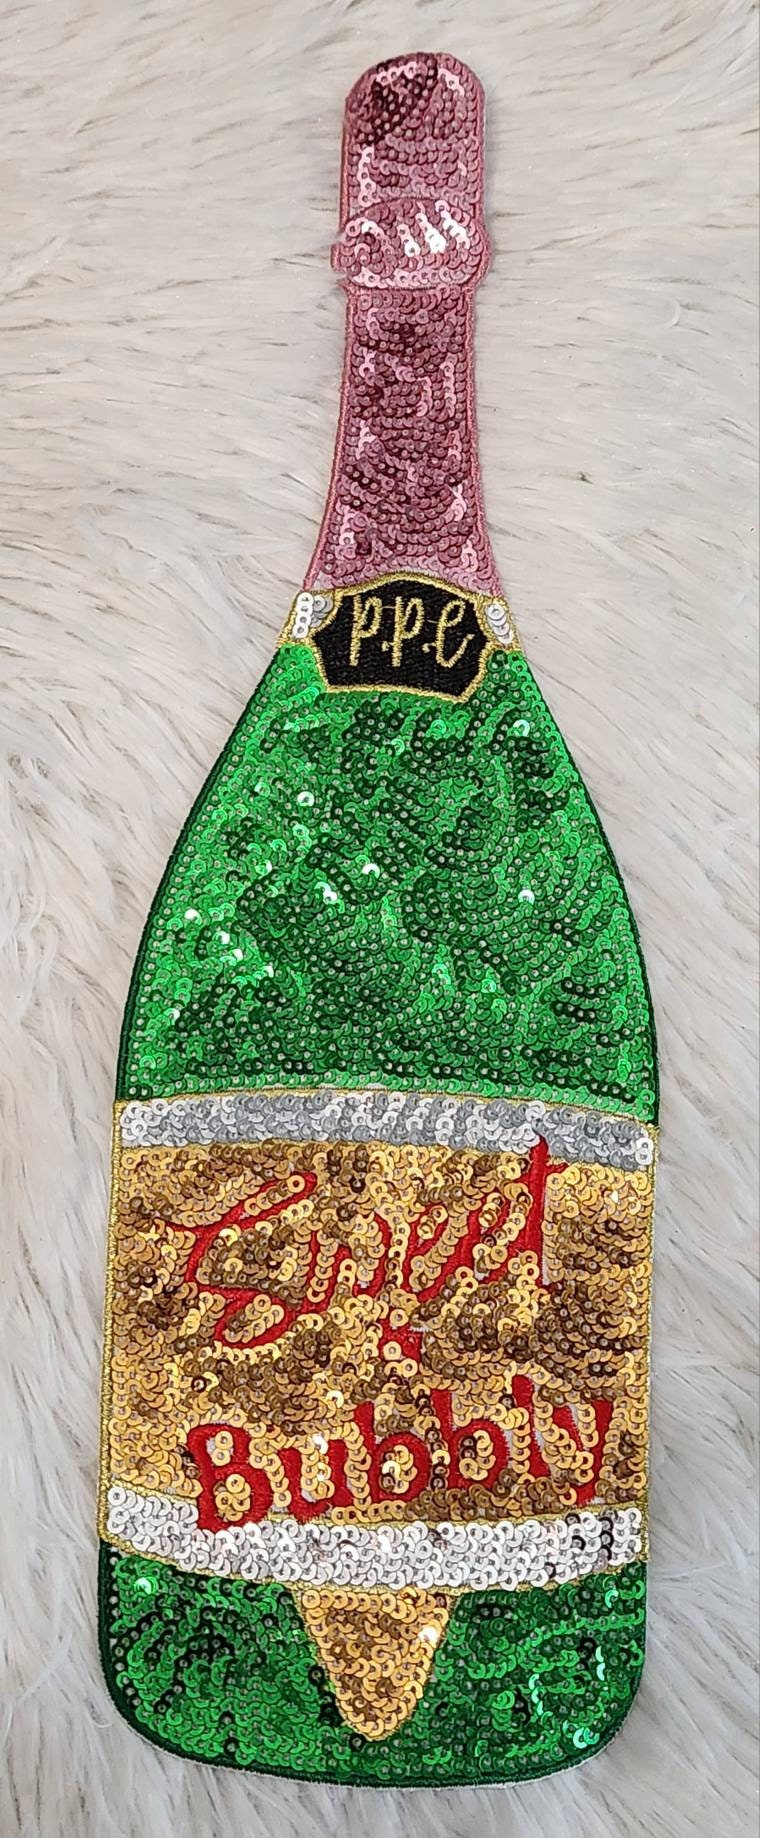 NEW, Sparkling Bubbly - 12" Iron-on, Sequins and Embroidered Wine Bottle LARGE Patch Perfect for Denim Jacket, Shirts, Hoodies, and More